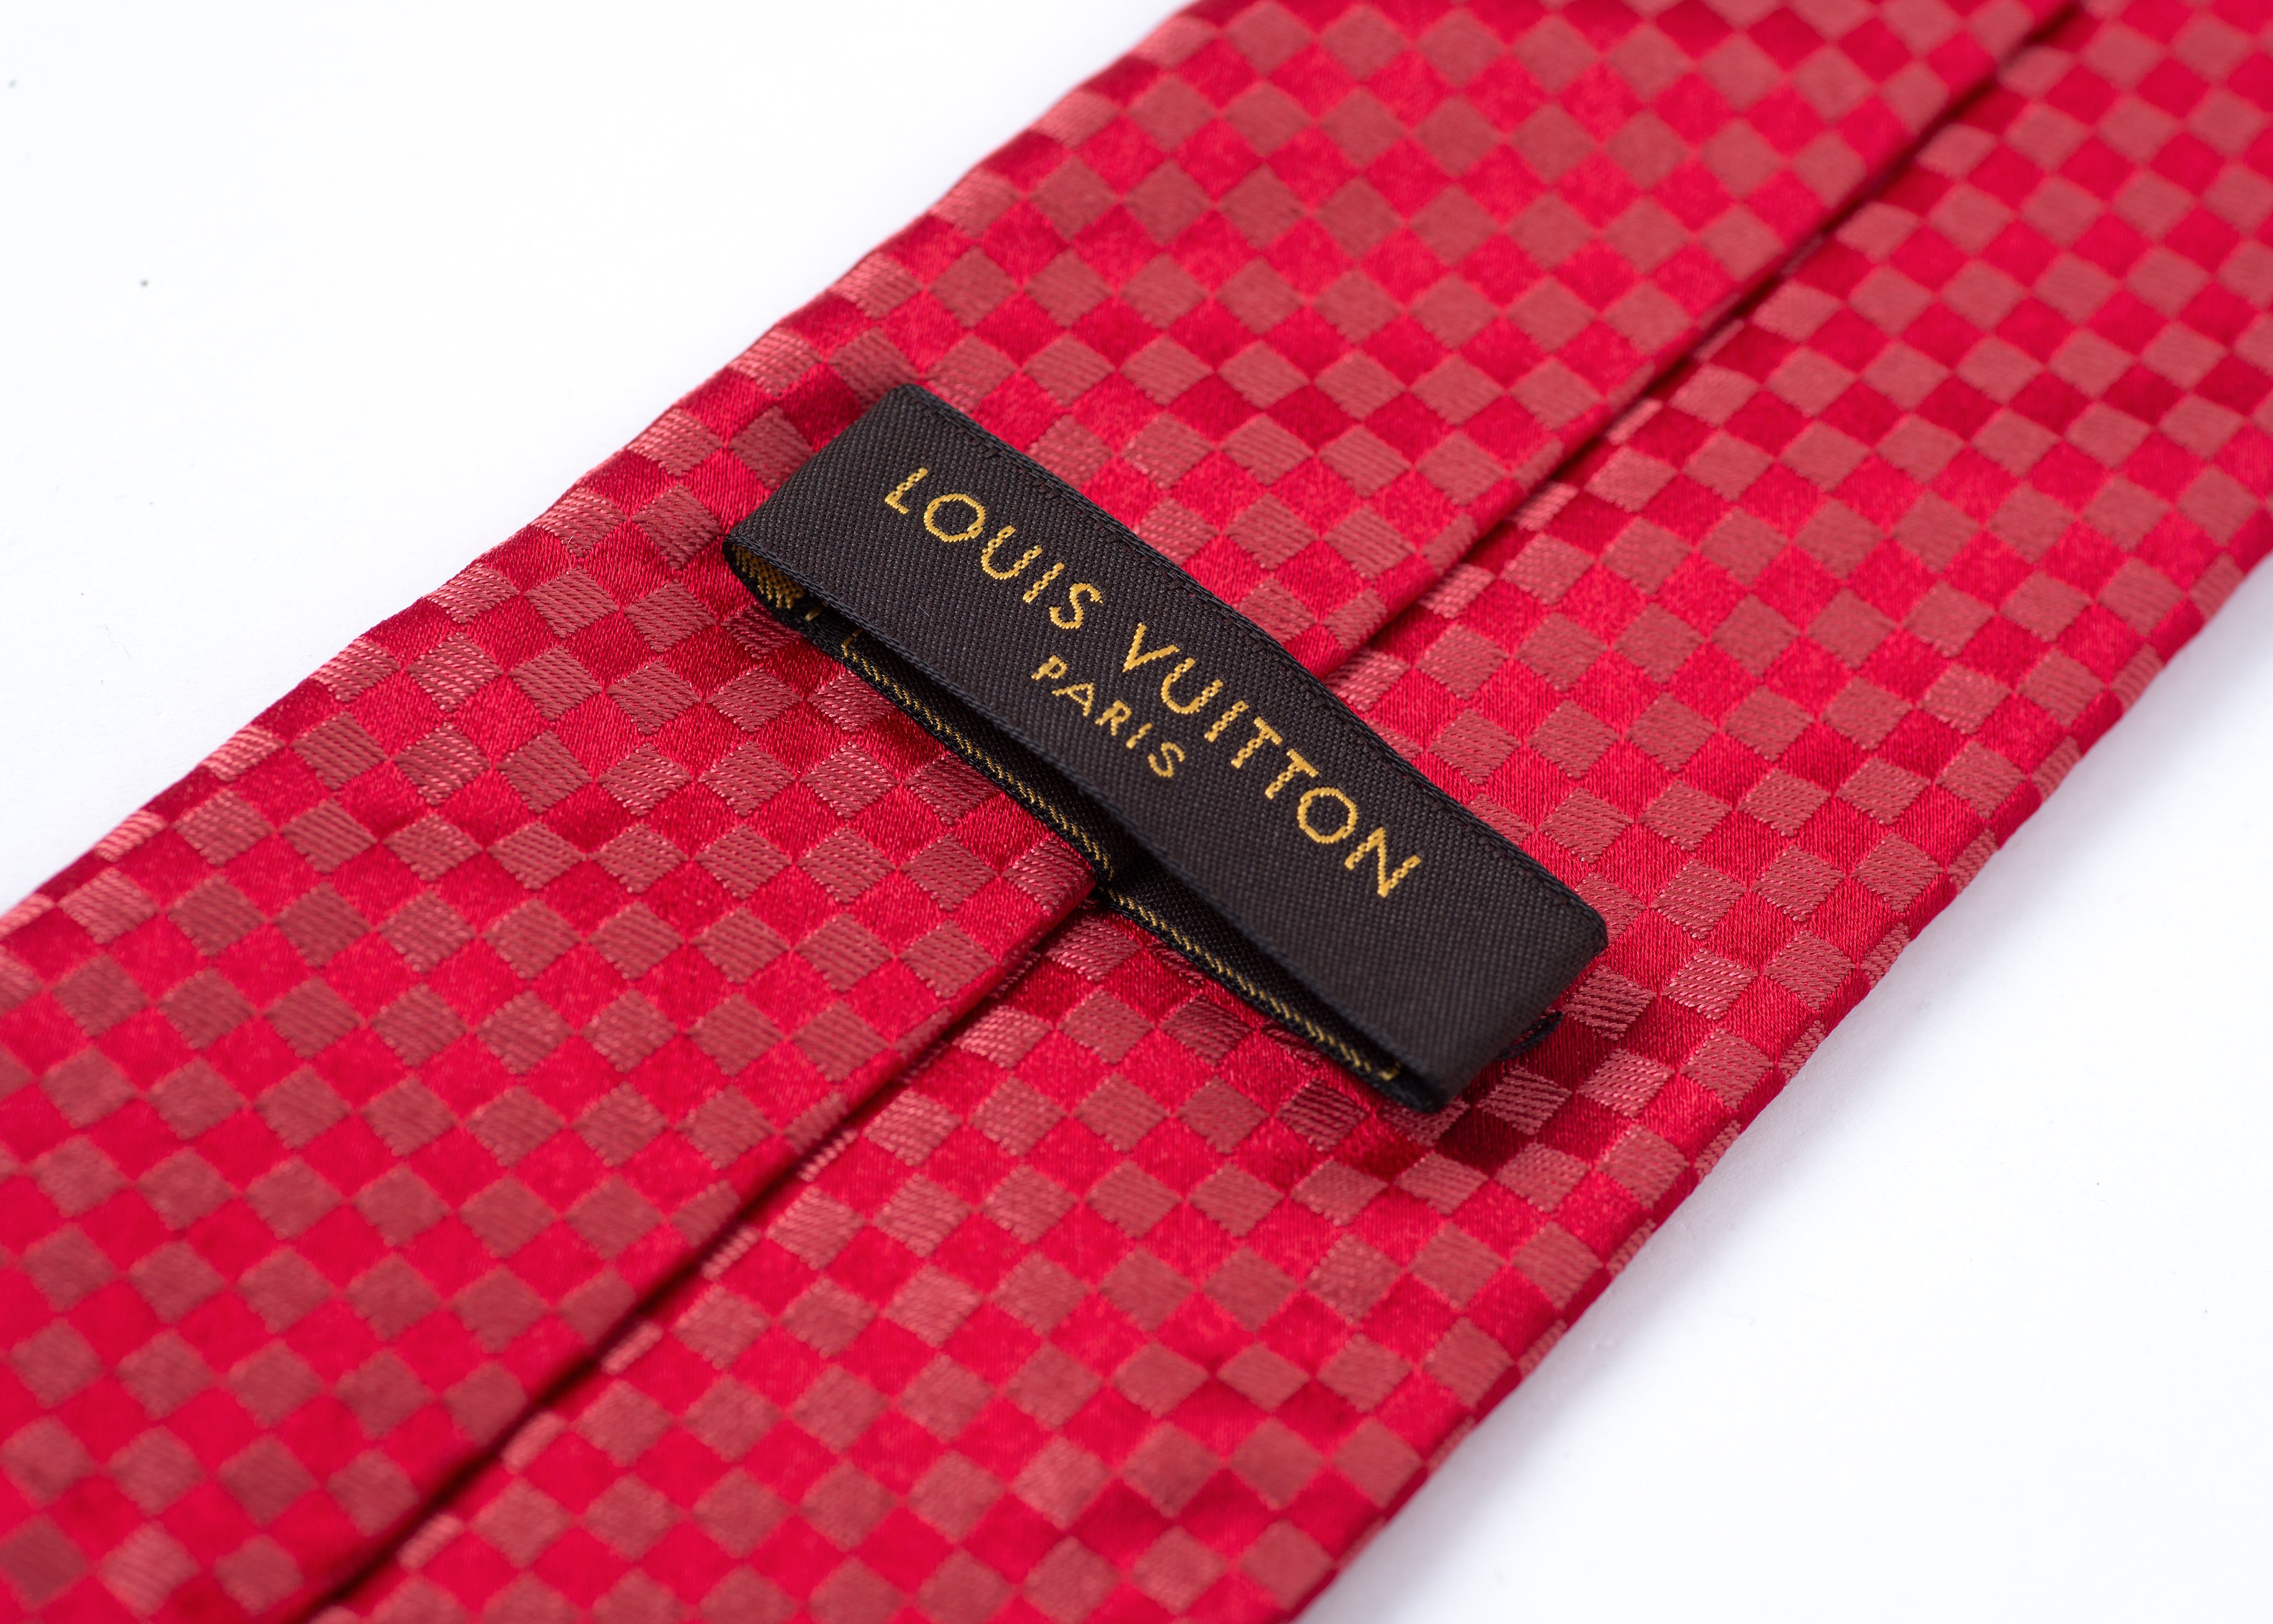 Louis Vuitton Gold Micro Damier Classic Pattern Checked Silk Tie